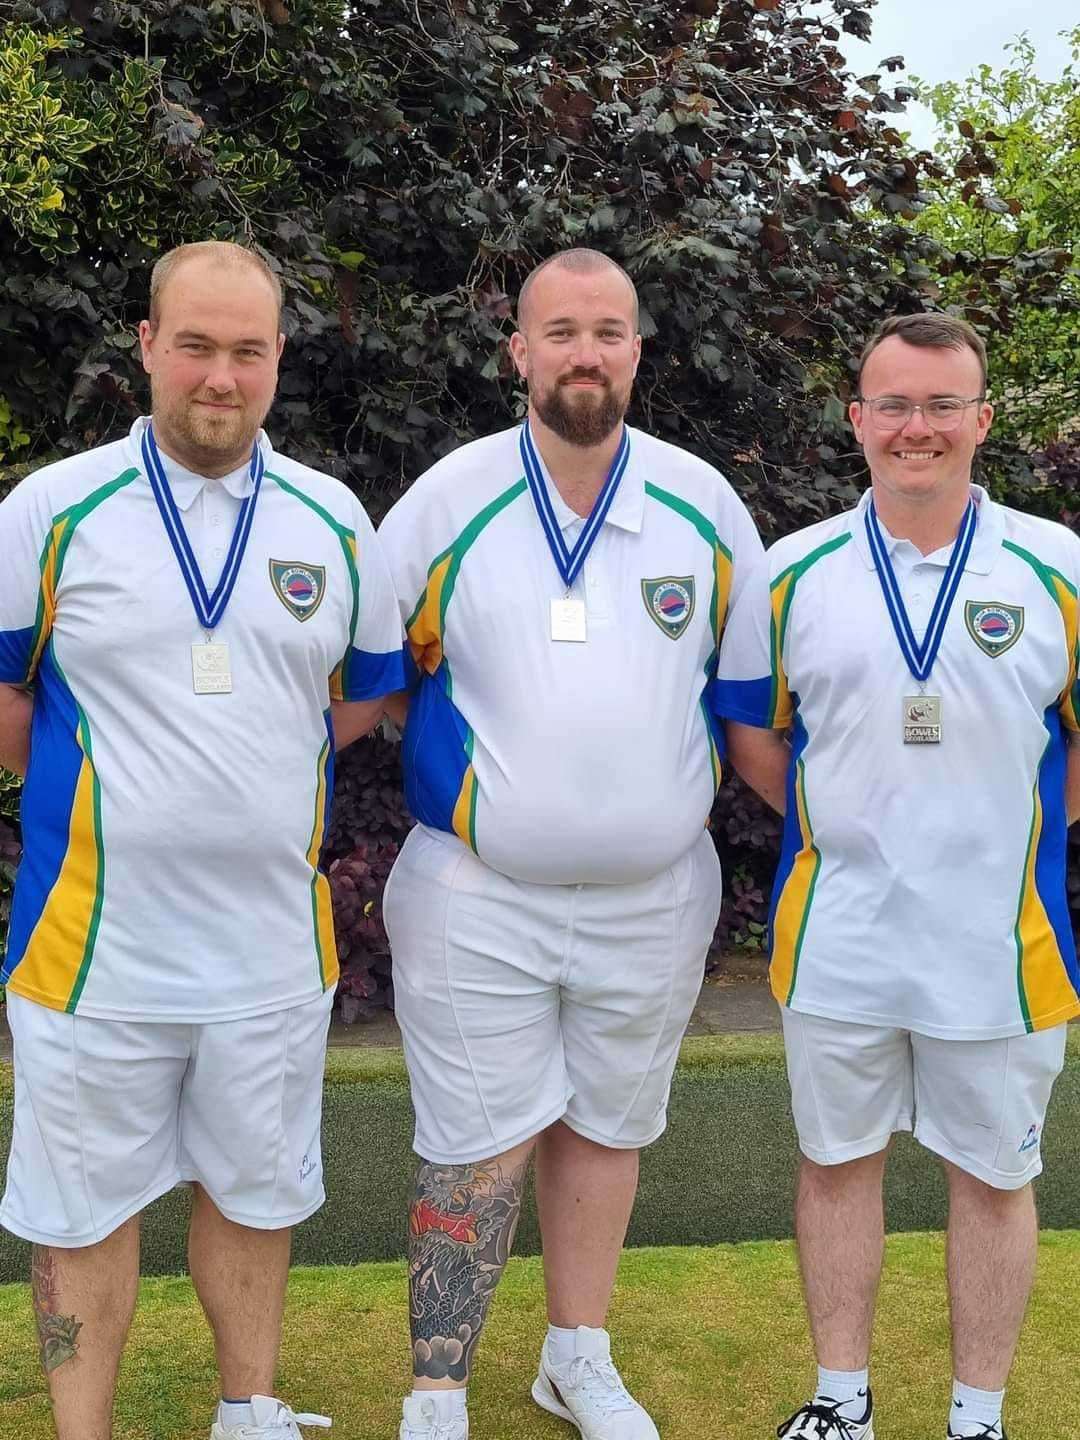 The team from Polmuir Bowling Club of Callum Brown, Keith Edment and Callum Work took silver in the gents triples.